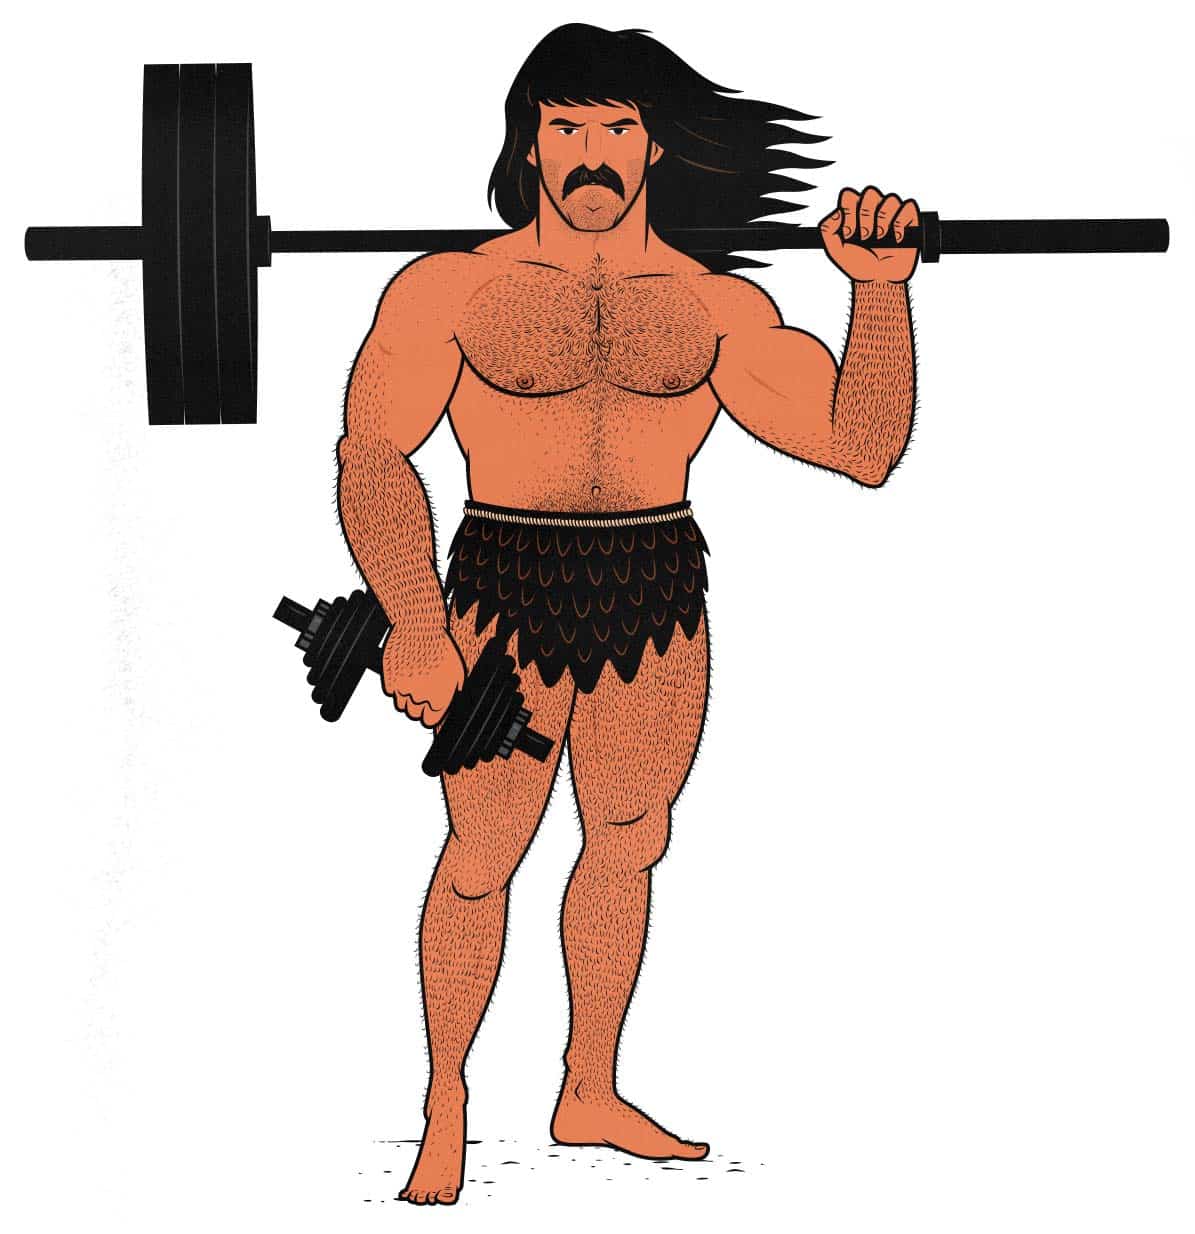 Illustration of a buff barbarian bulker lifting weights to build muscle and gain weight.